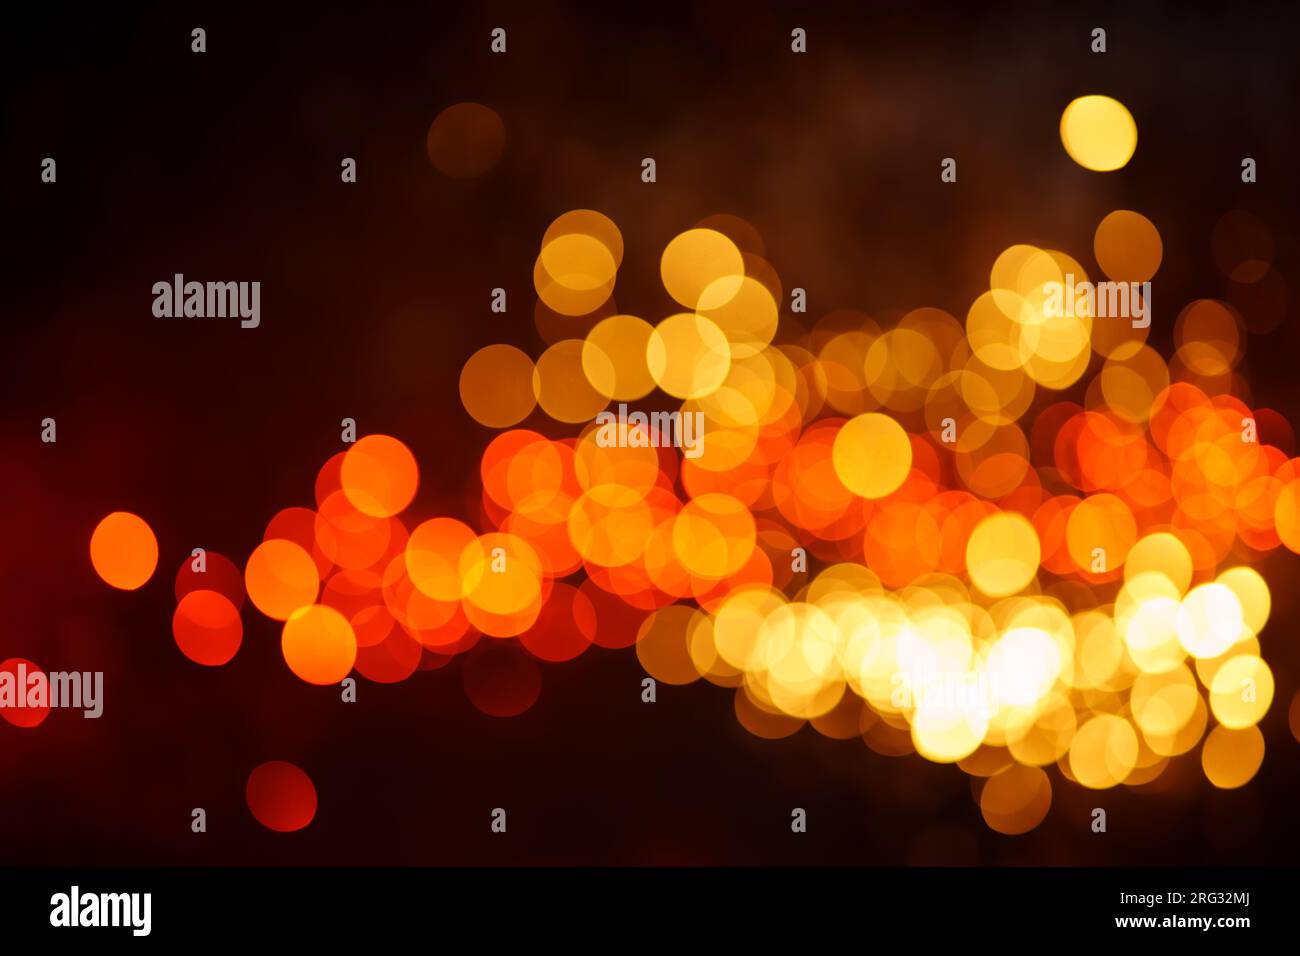 Abstract dark background with defocused lights Stock Photo